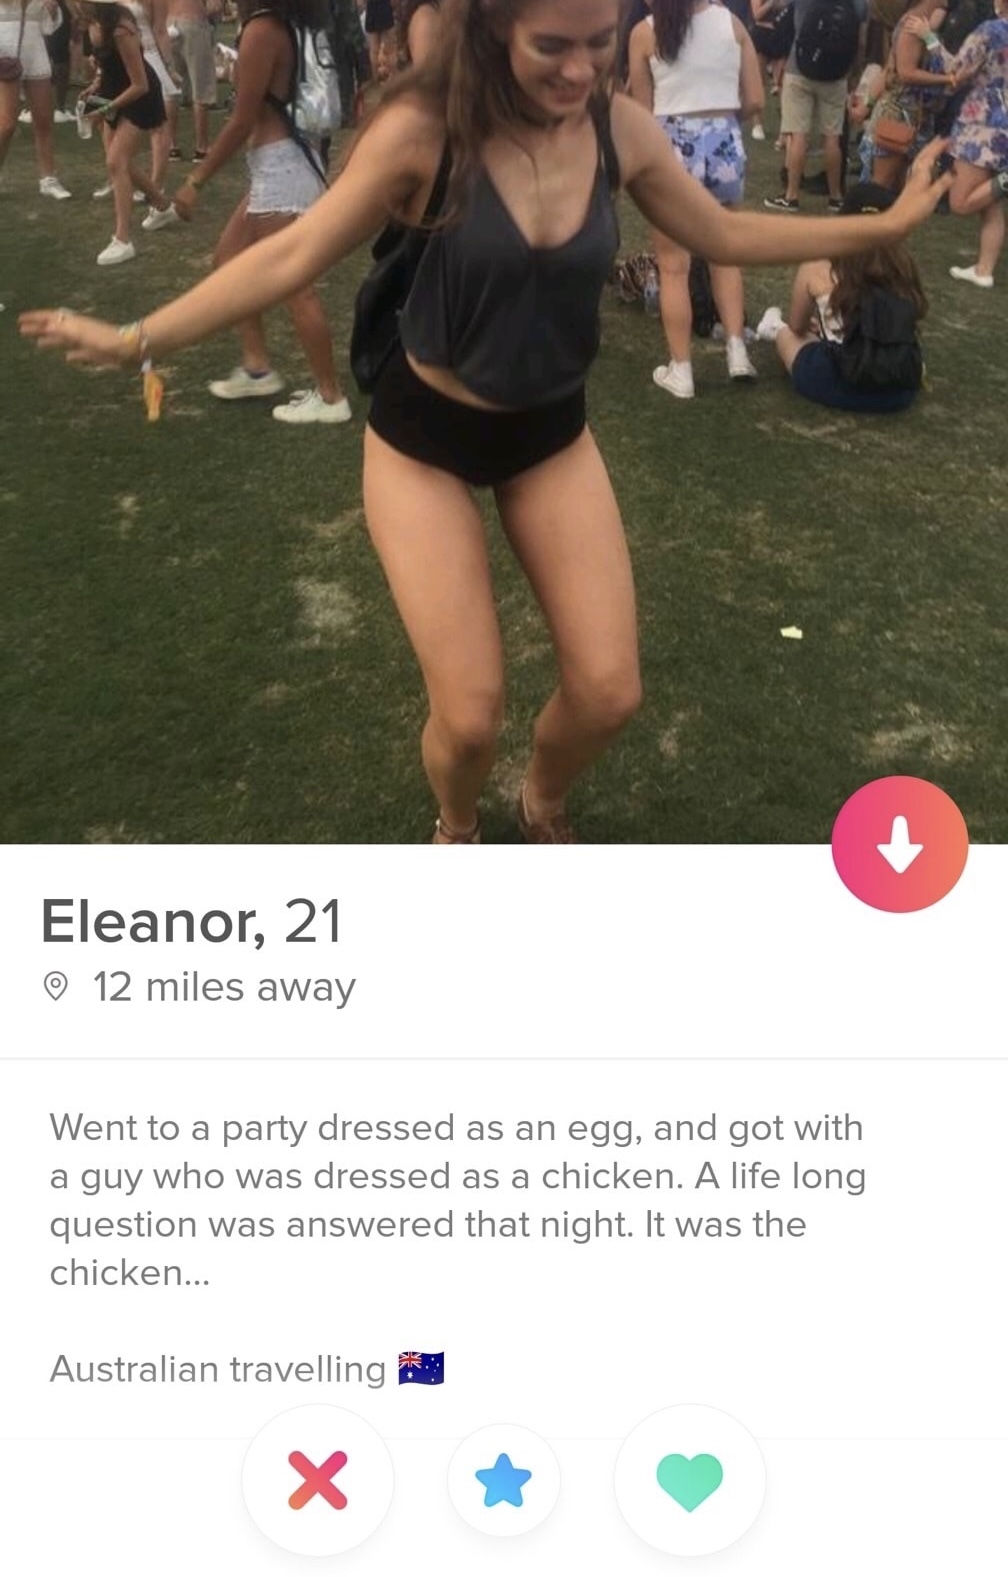 came first the chicken or the egg tinder - Eleanor, 21 12 miles away Went to a party dressed as an egg, and got with a guy who was dressed as a chicken. A life long question was answered that night. It was the chicken... Australian travelling X